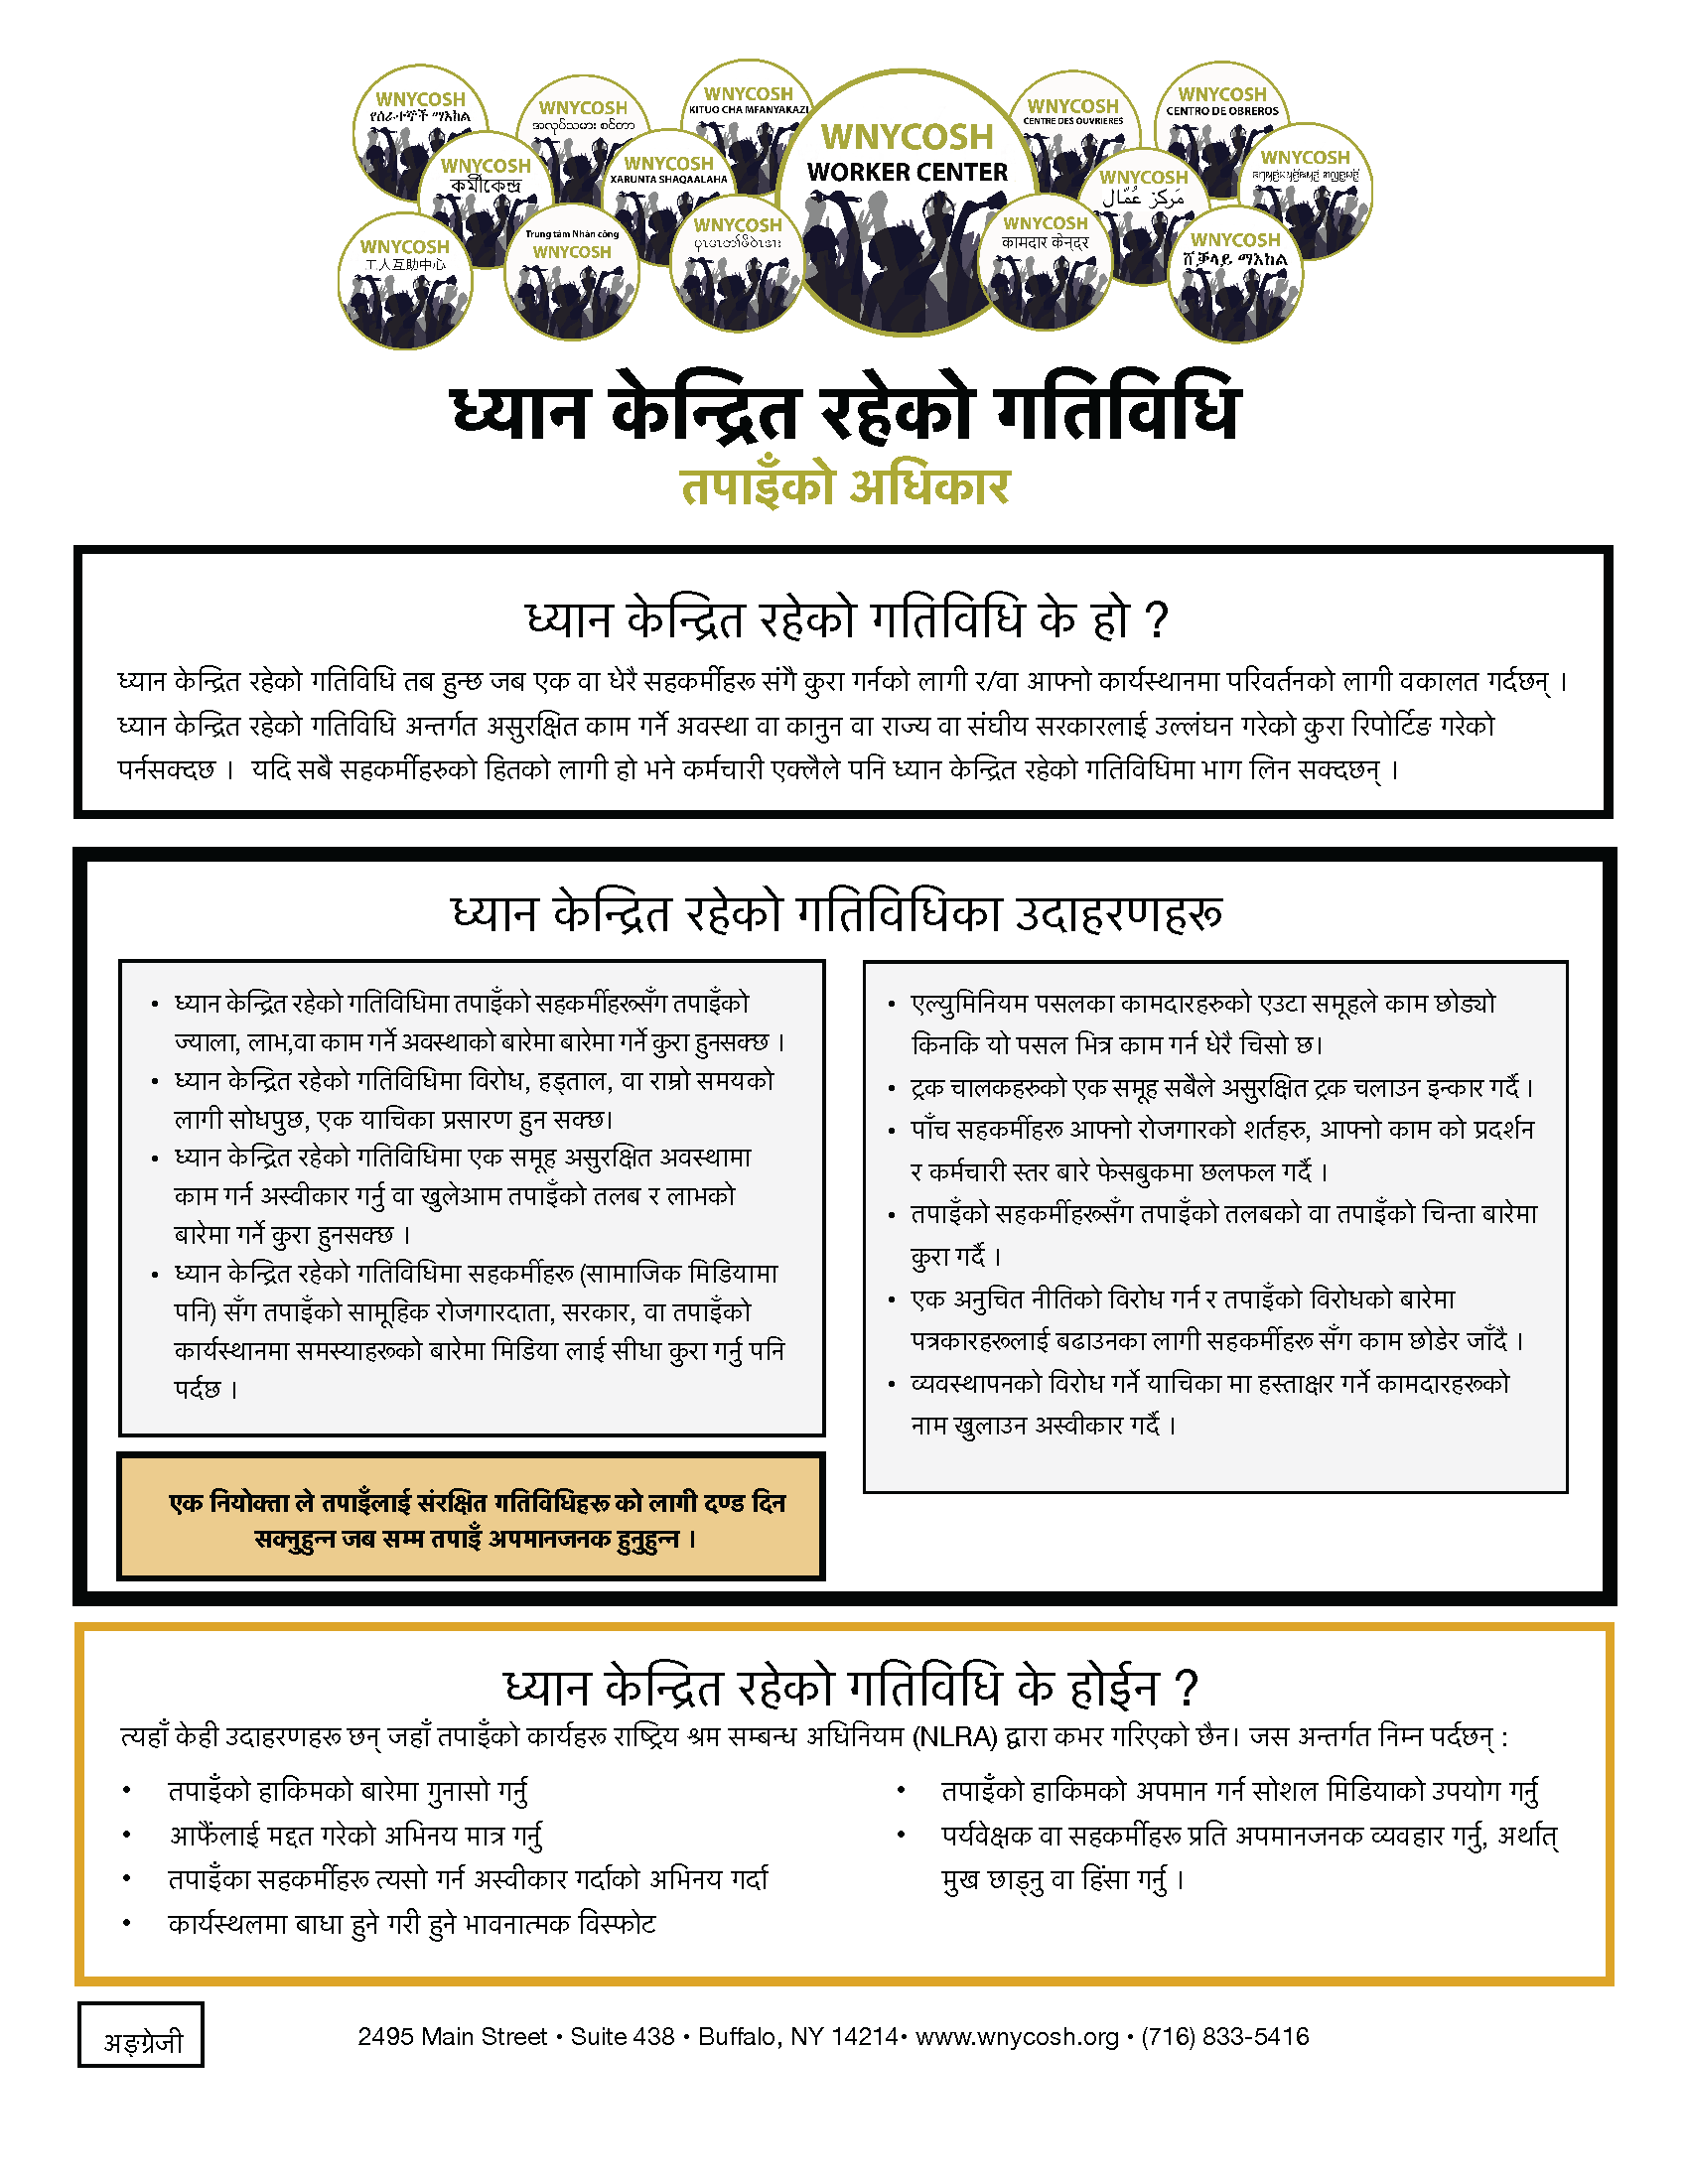 Thumbnail for Concerted Activity Factsheet in Nepali